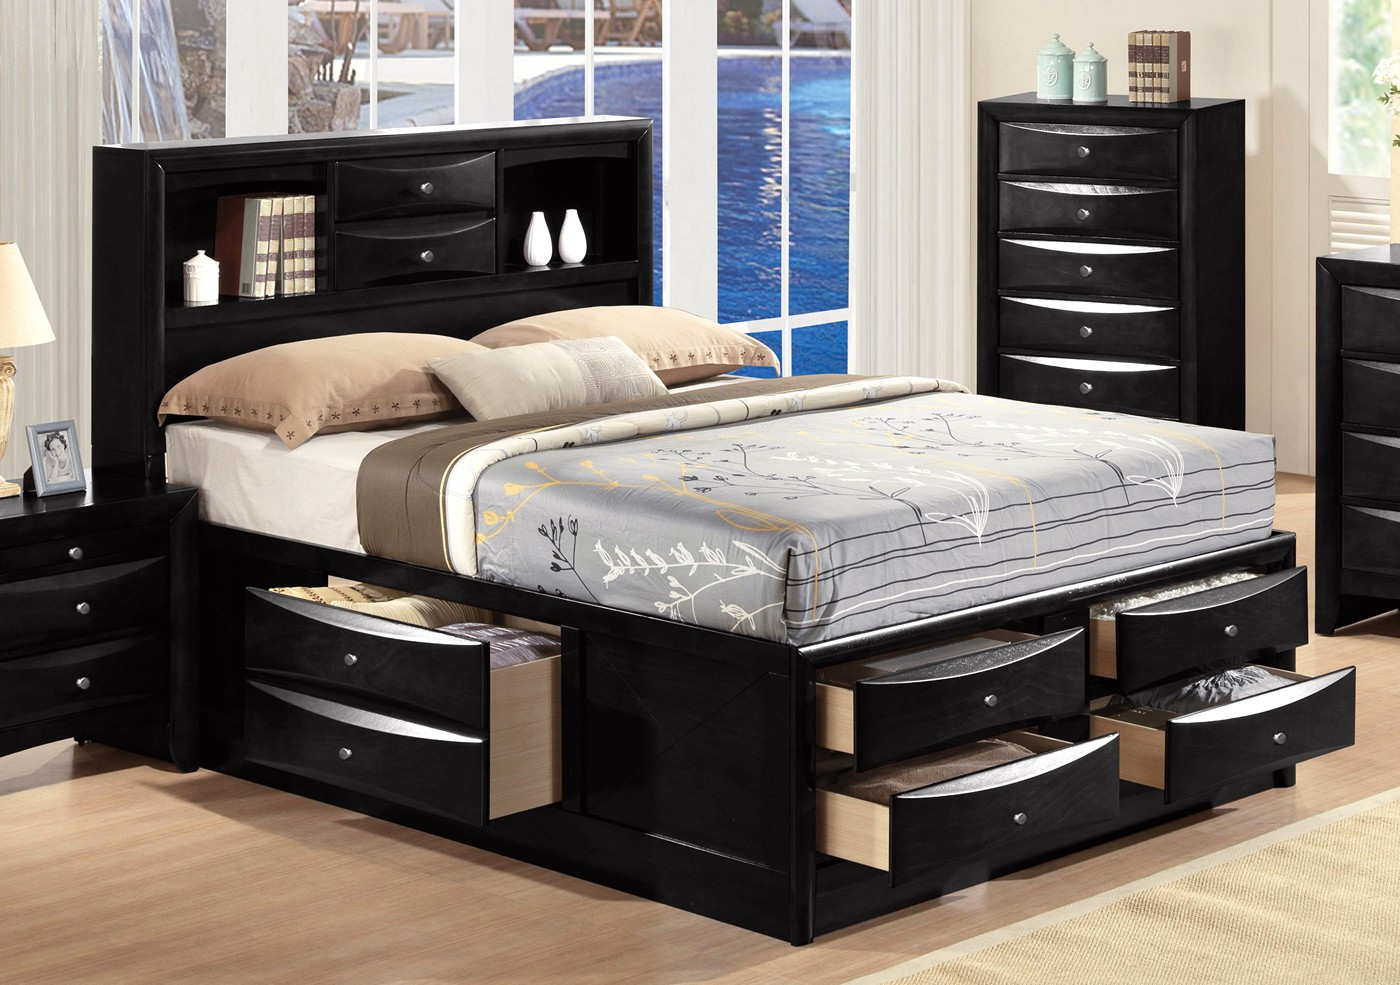 Queen Bedroom Sets With Storage
 Limerick Transitional 4 pc Storage Queen Platform Bed in